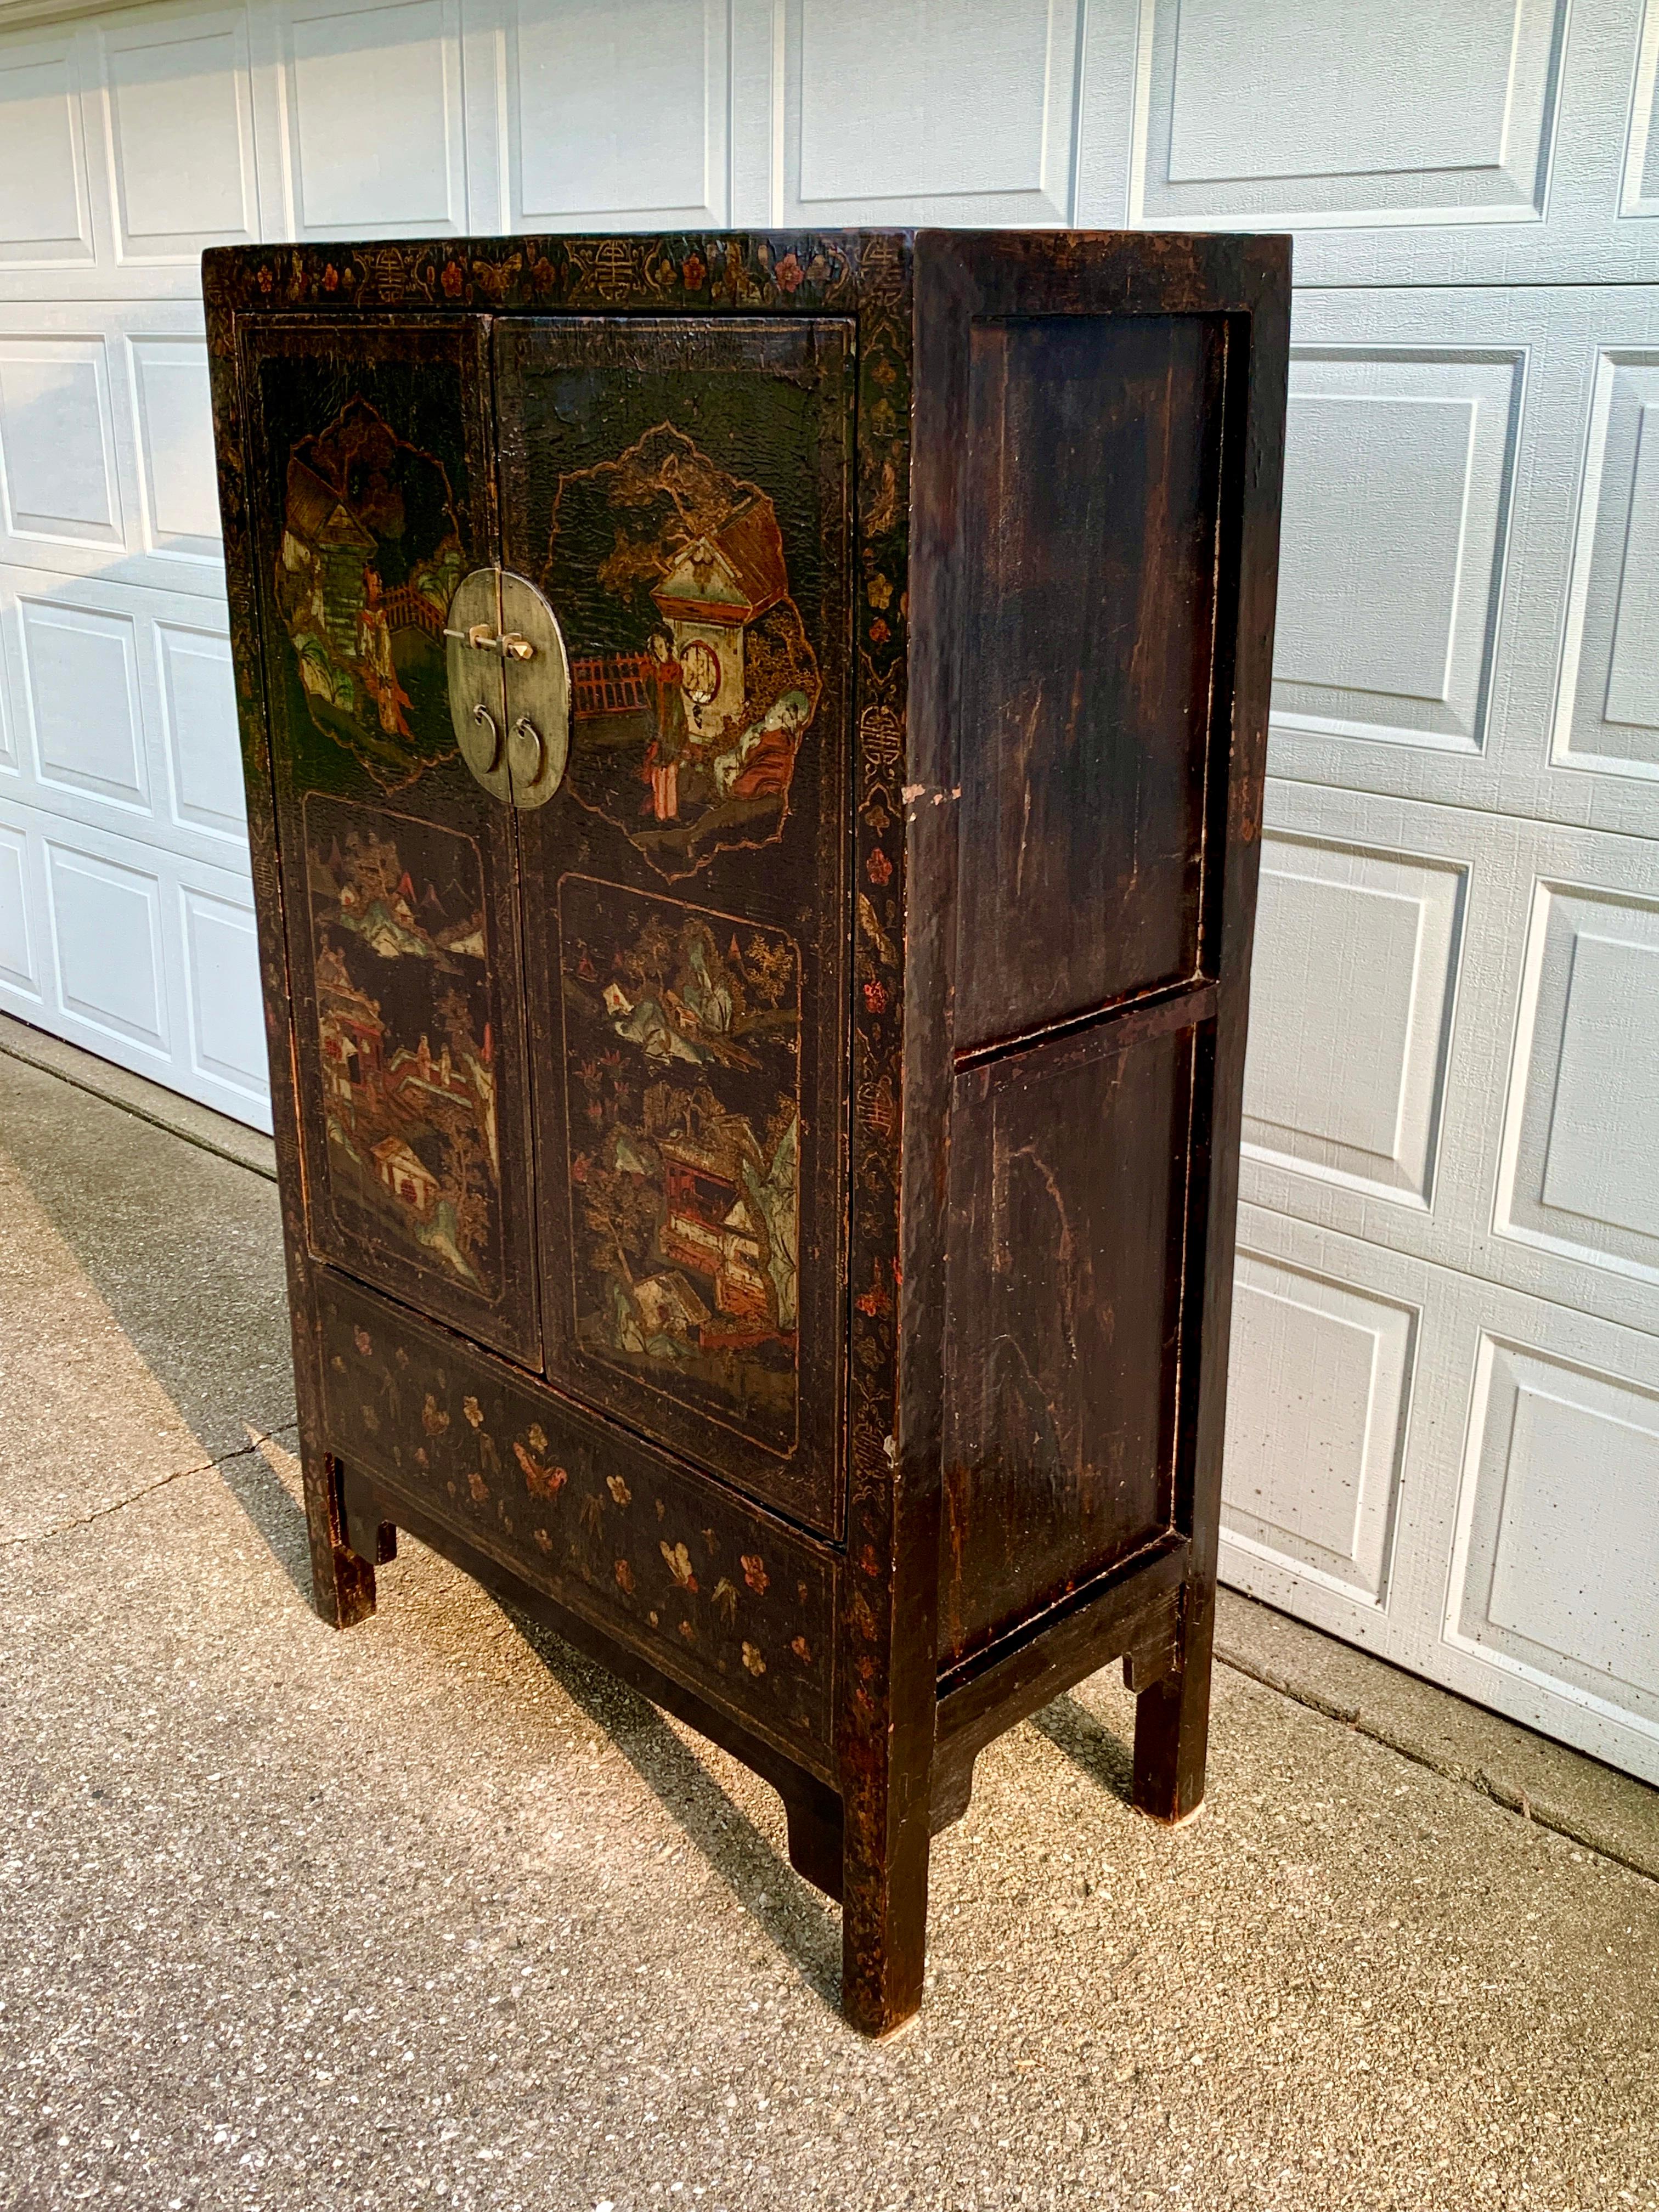 A stunning and rare black lacquered Chinese cabinet featuring hand-painted Chinoiserie scenes. The two-door cabinet has two drawers and three shelves inside, along with a lower compartment concealed under a removable panel on the bottom